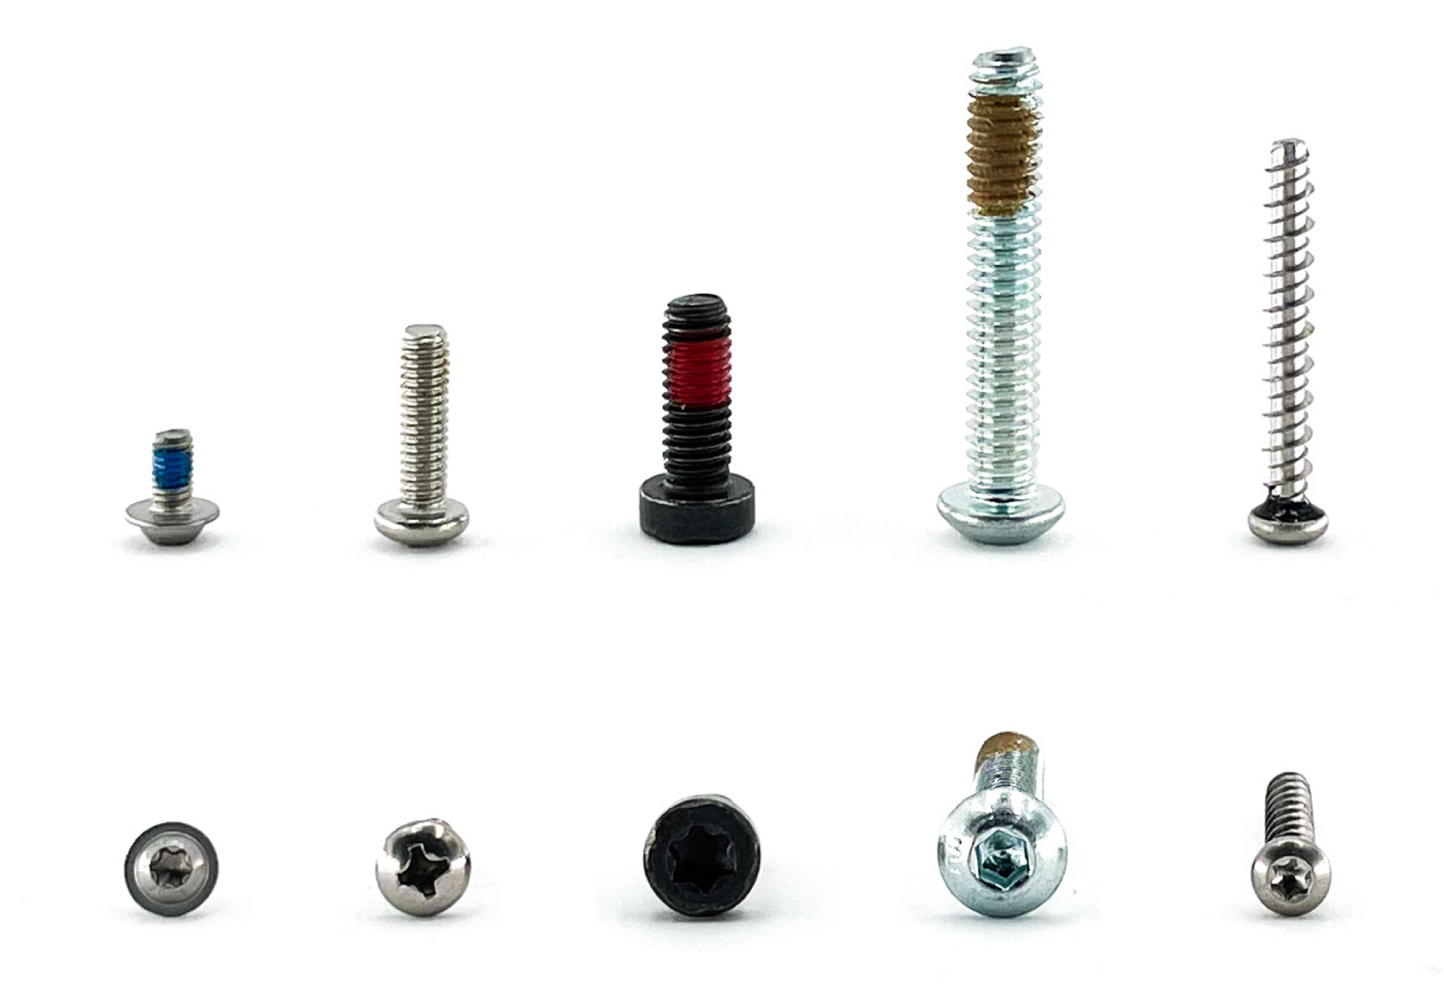 SCREWS WITH 180 DEGREE ADHESIVES